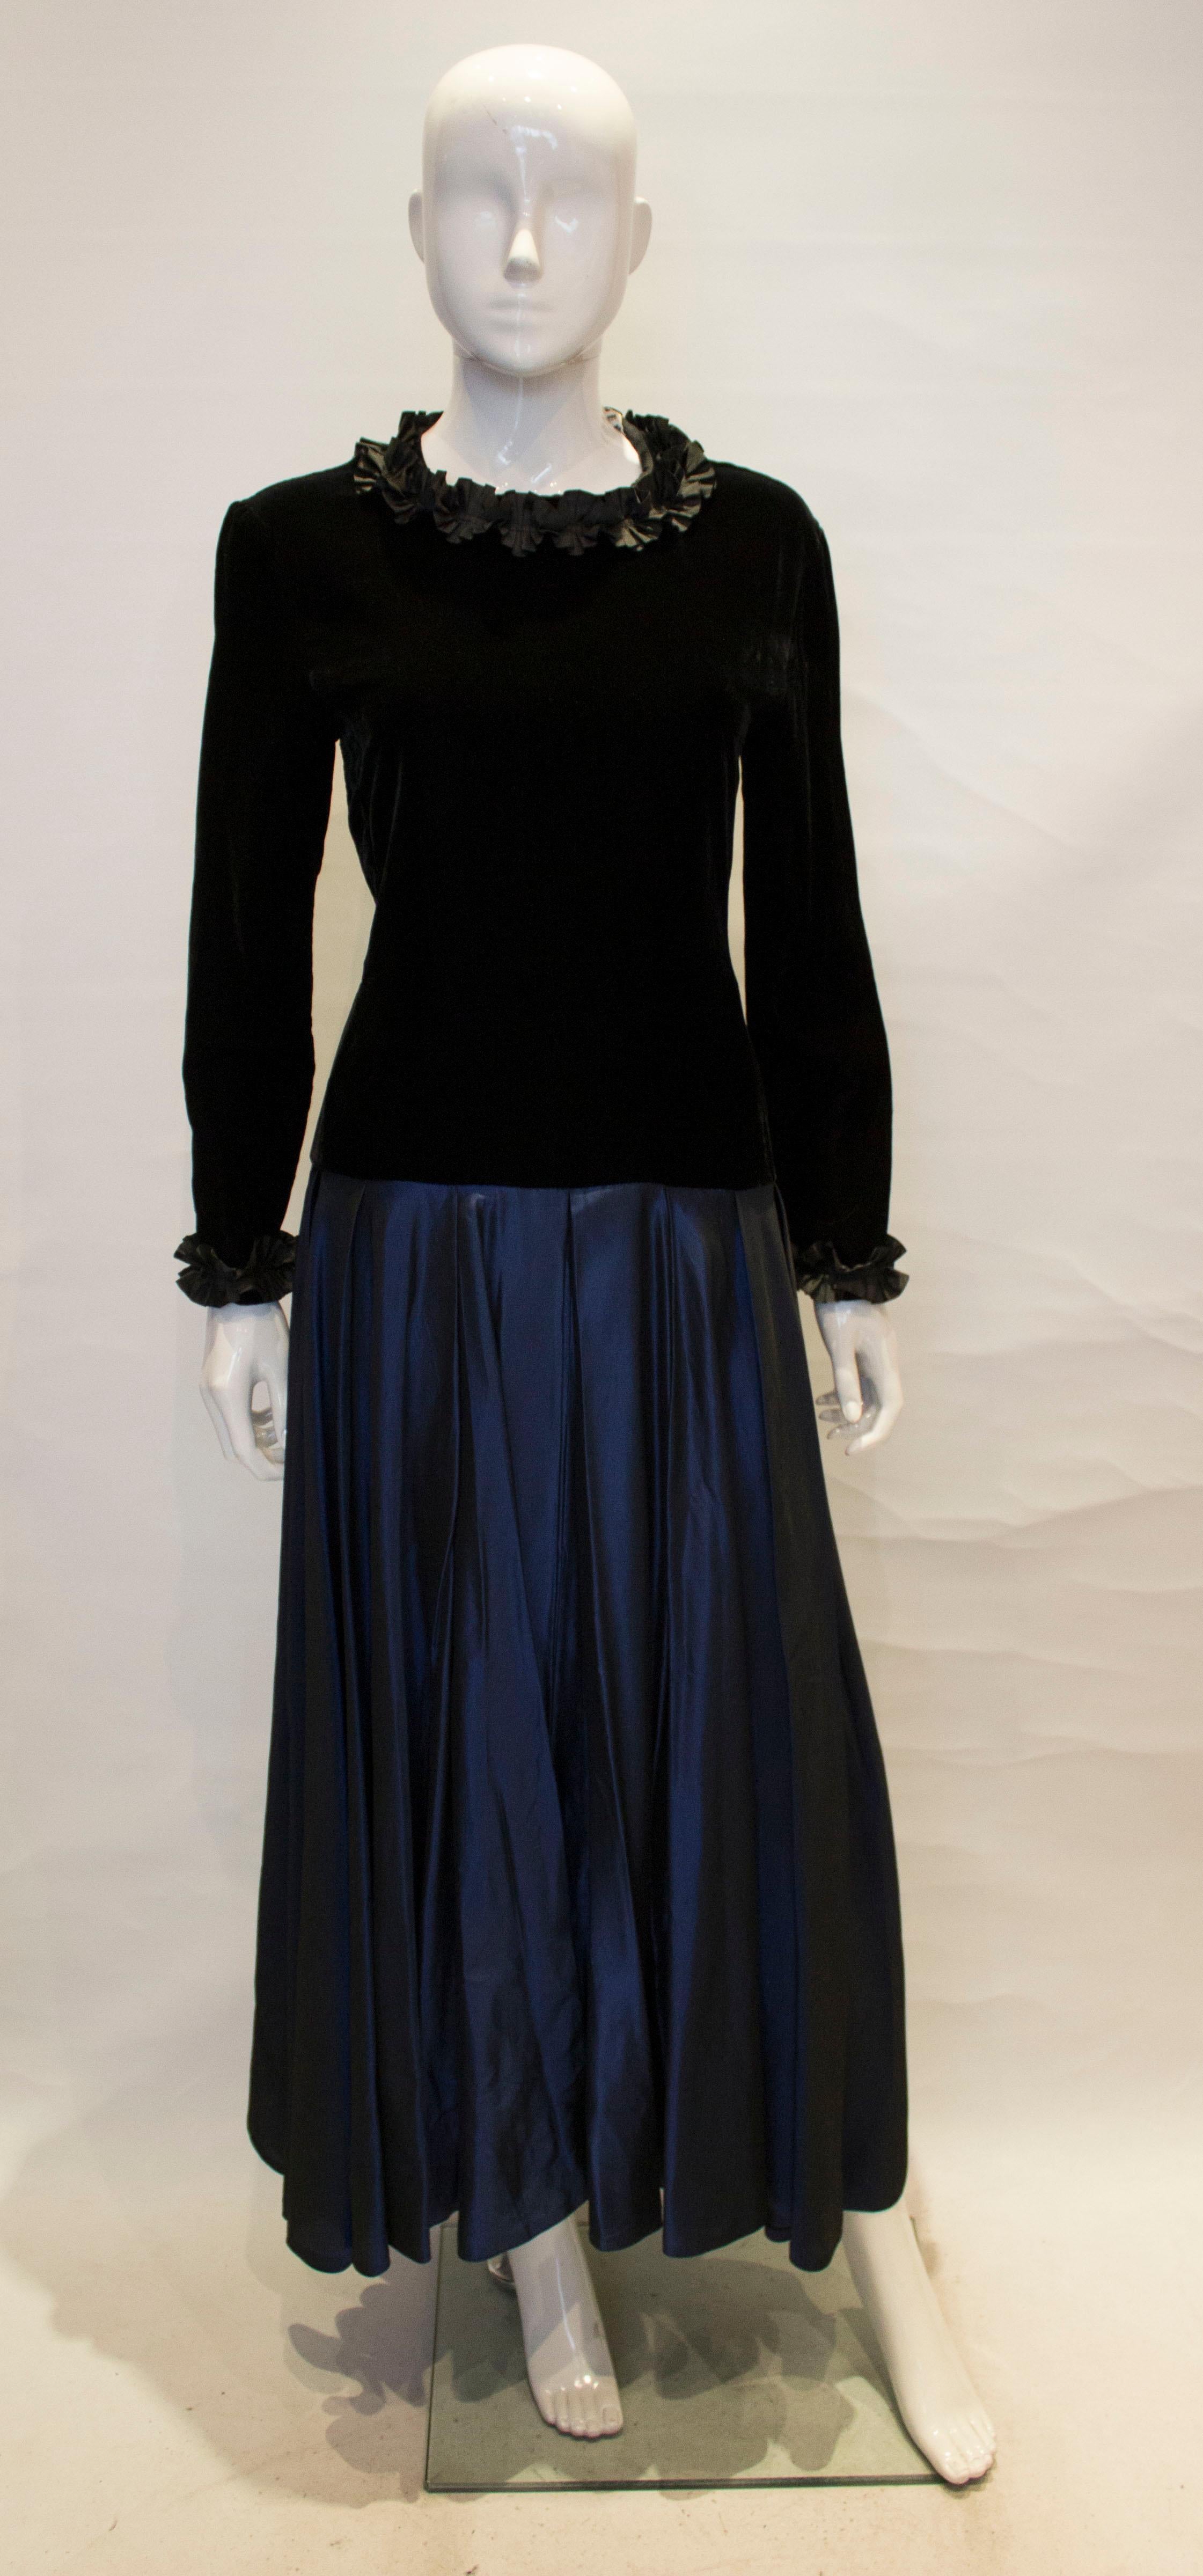 An elegant evening gown by Jeager.  The dress has a satin blue skirt  with a black velvet top , a central back zip and frills at the cuff and neckline.